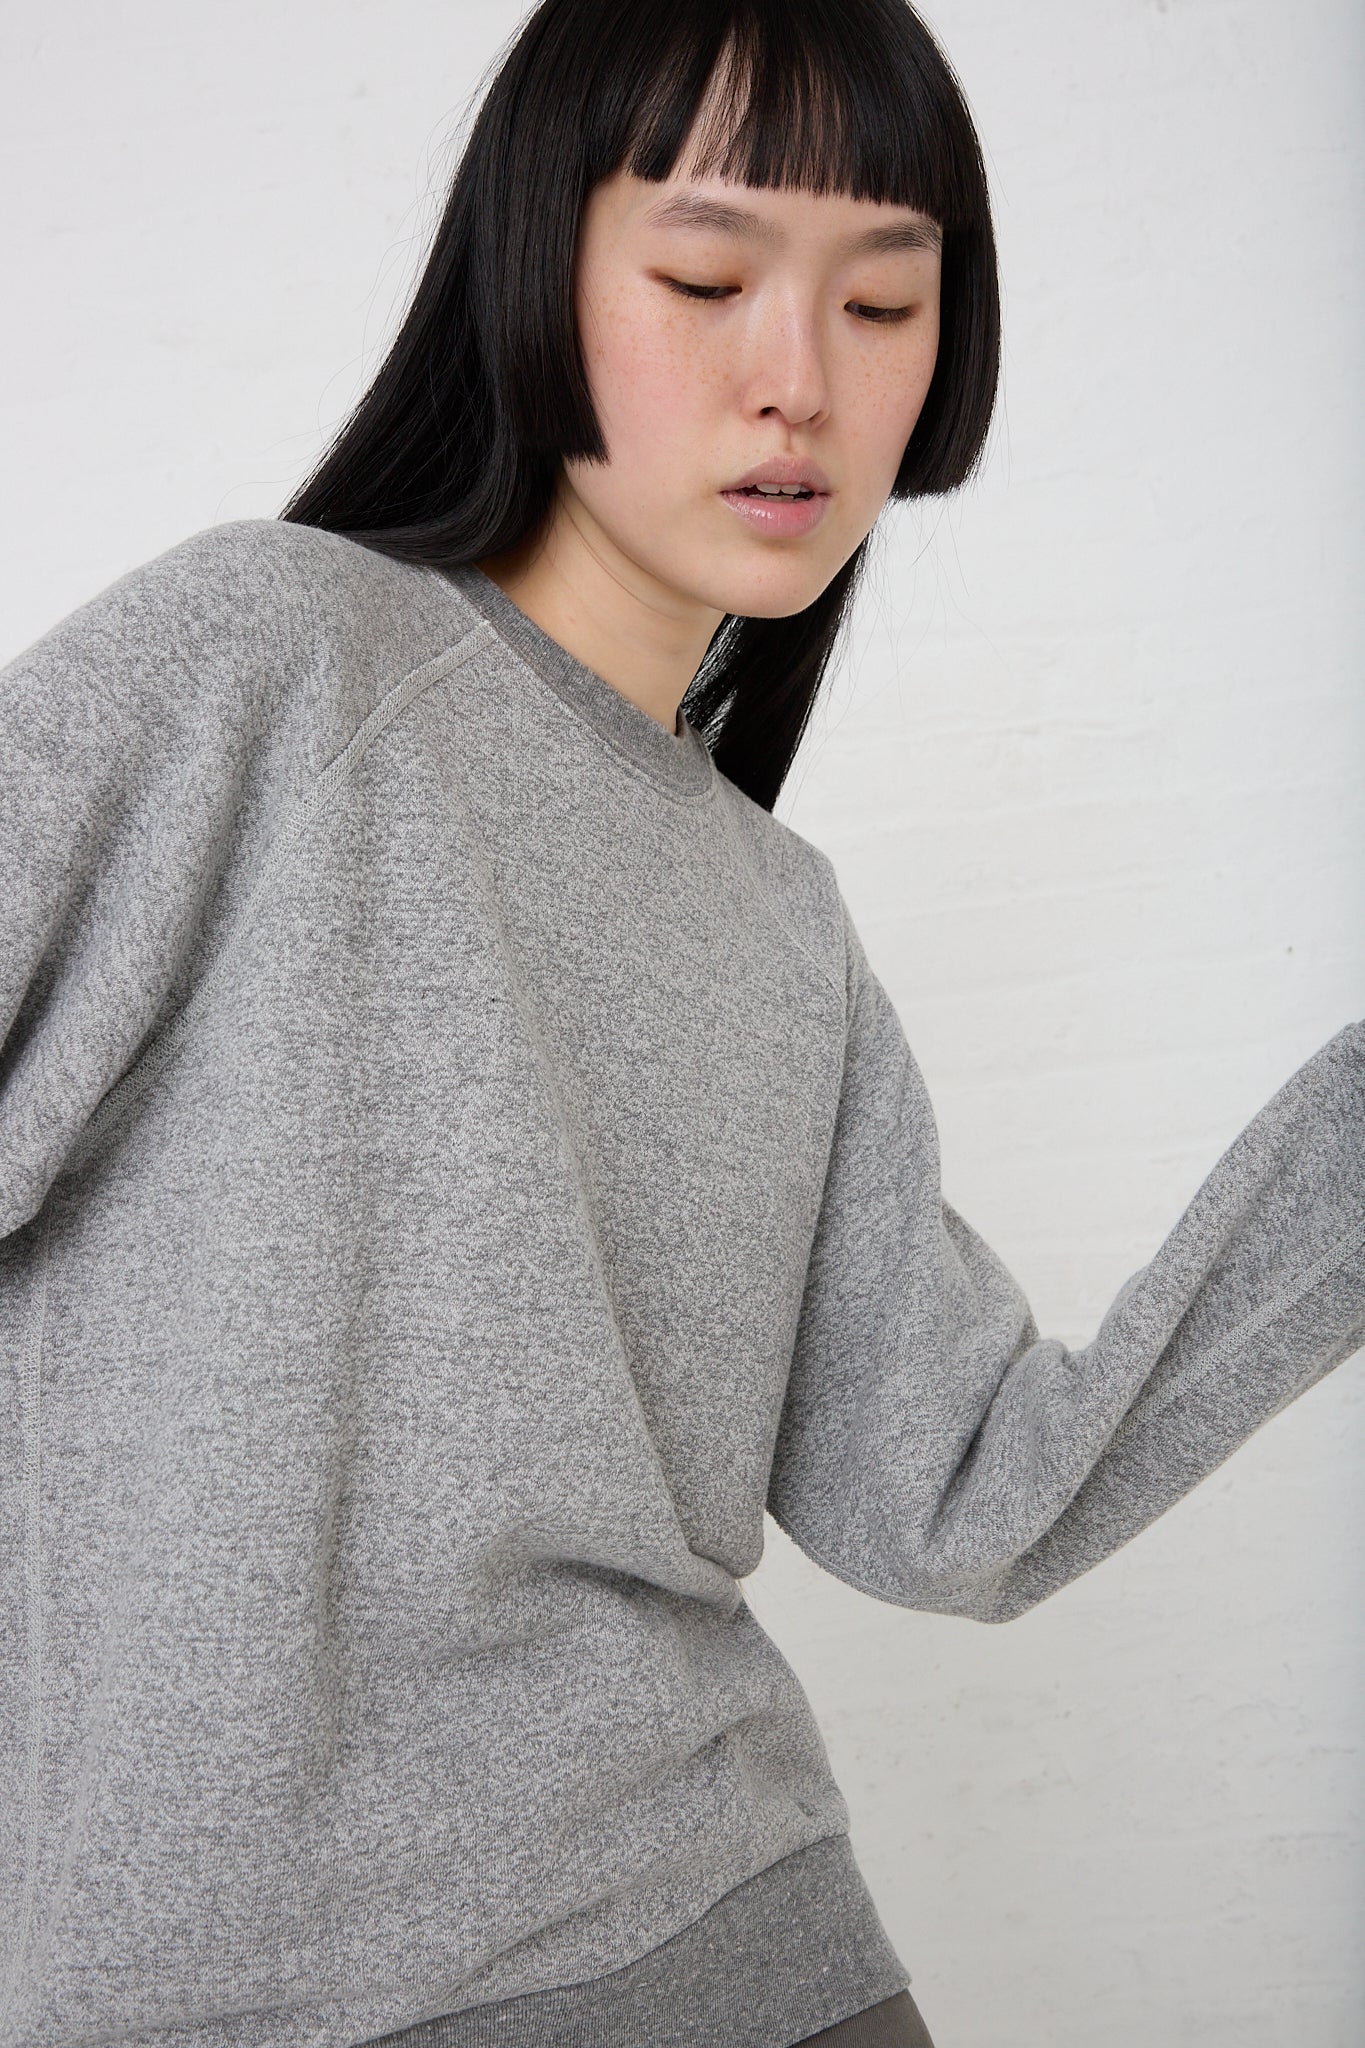 The model is wearing a French Terry Sweatshirt in Heather Grey by B Sides.